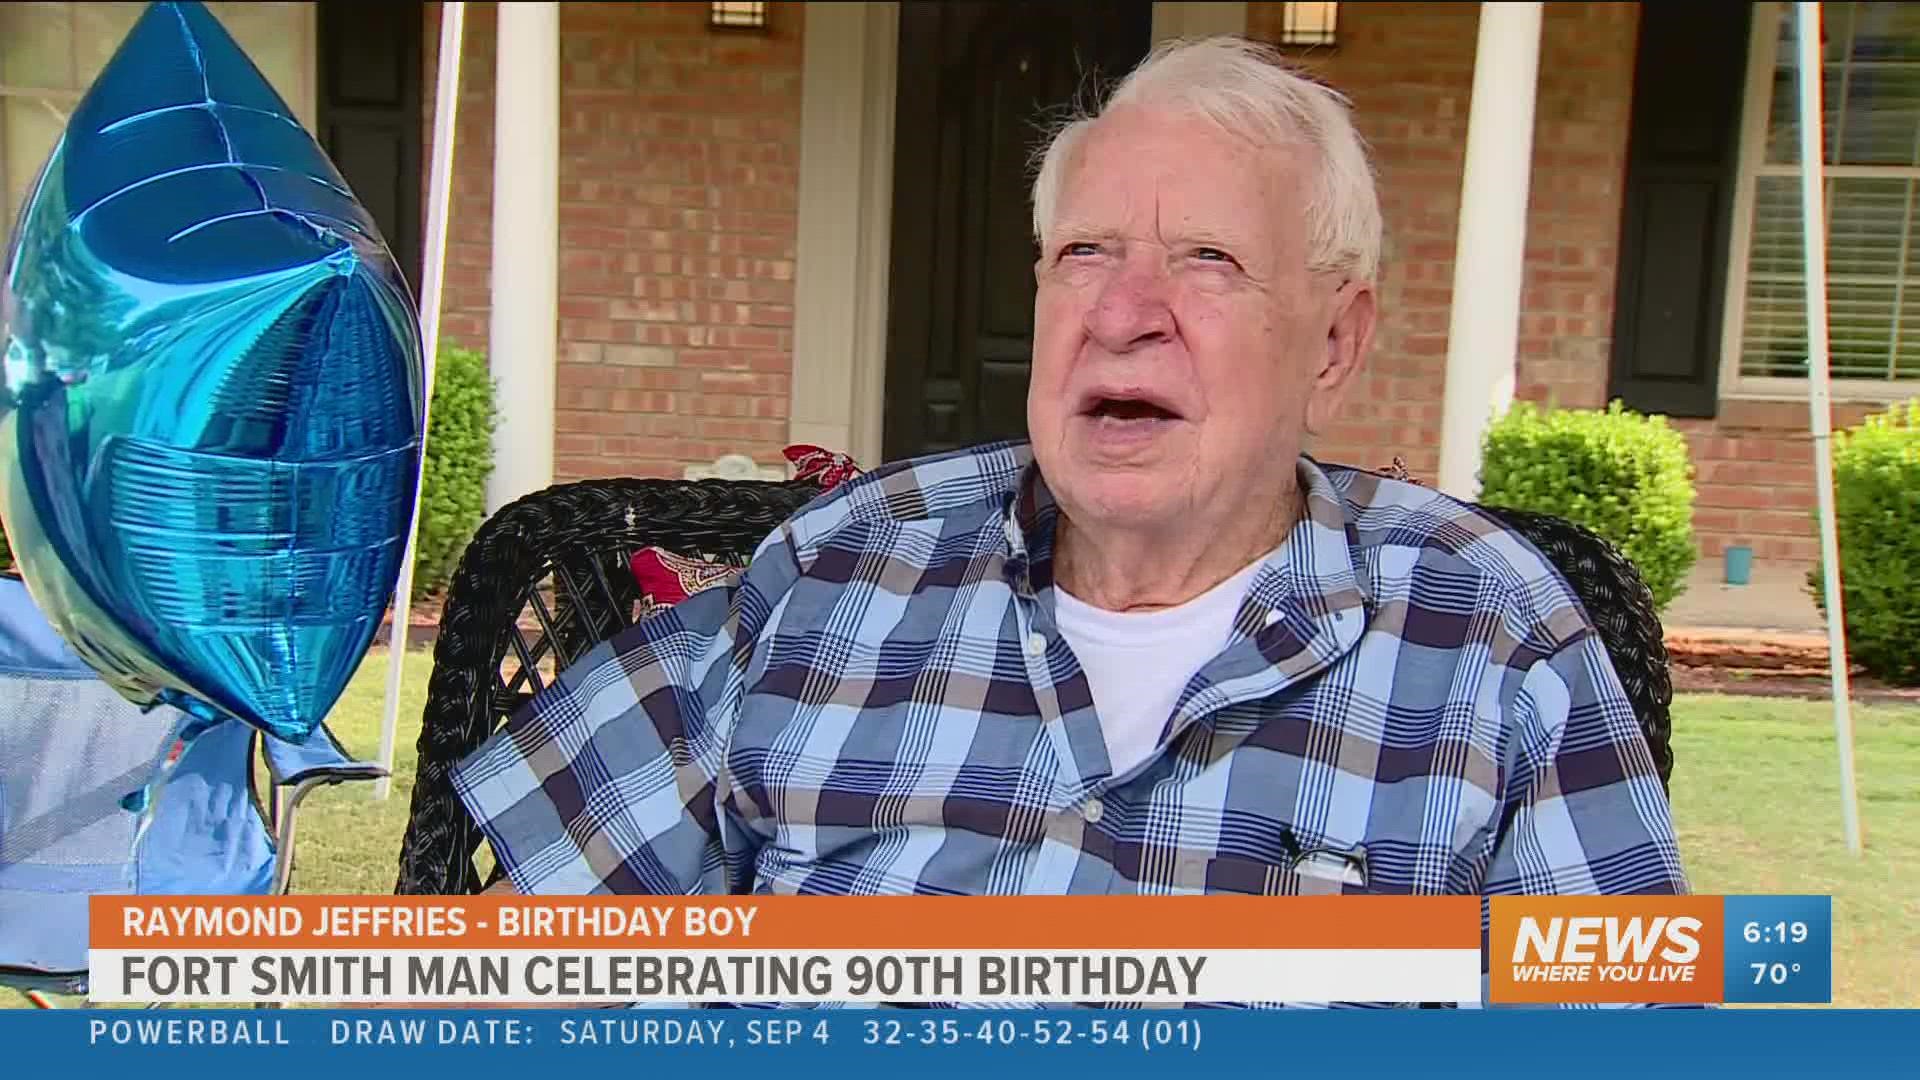 Raymond Jeffries celebrated his 90th birthday over the weekend and had one special request, a drive-by party.